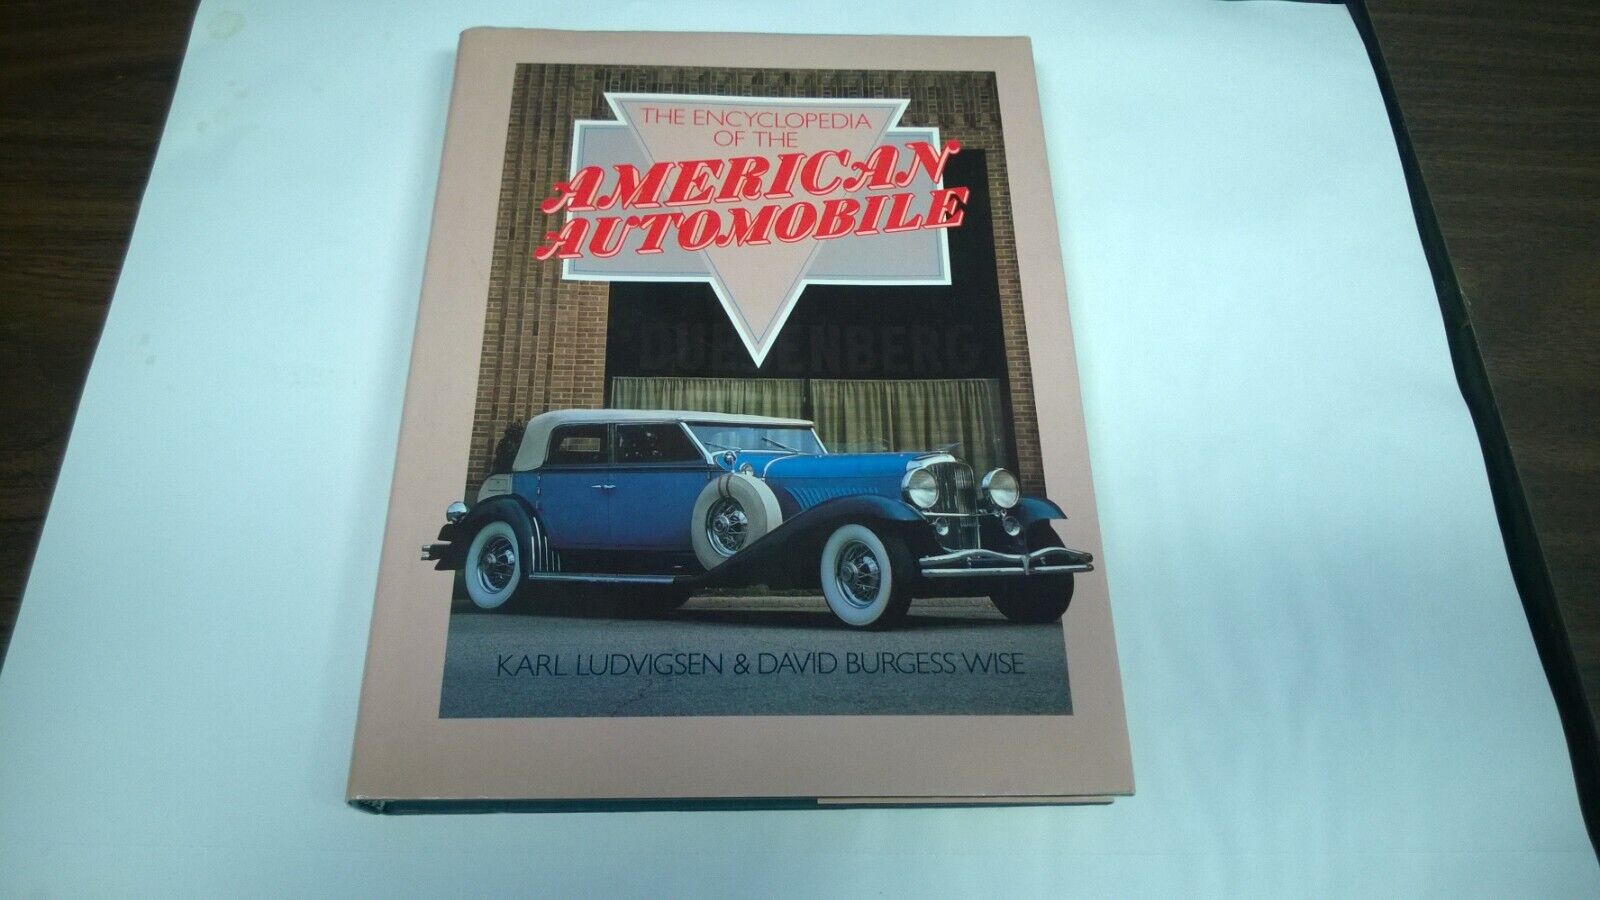 The Encyclopedia of the American Automobile 1900 to 1981